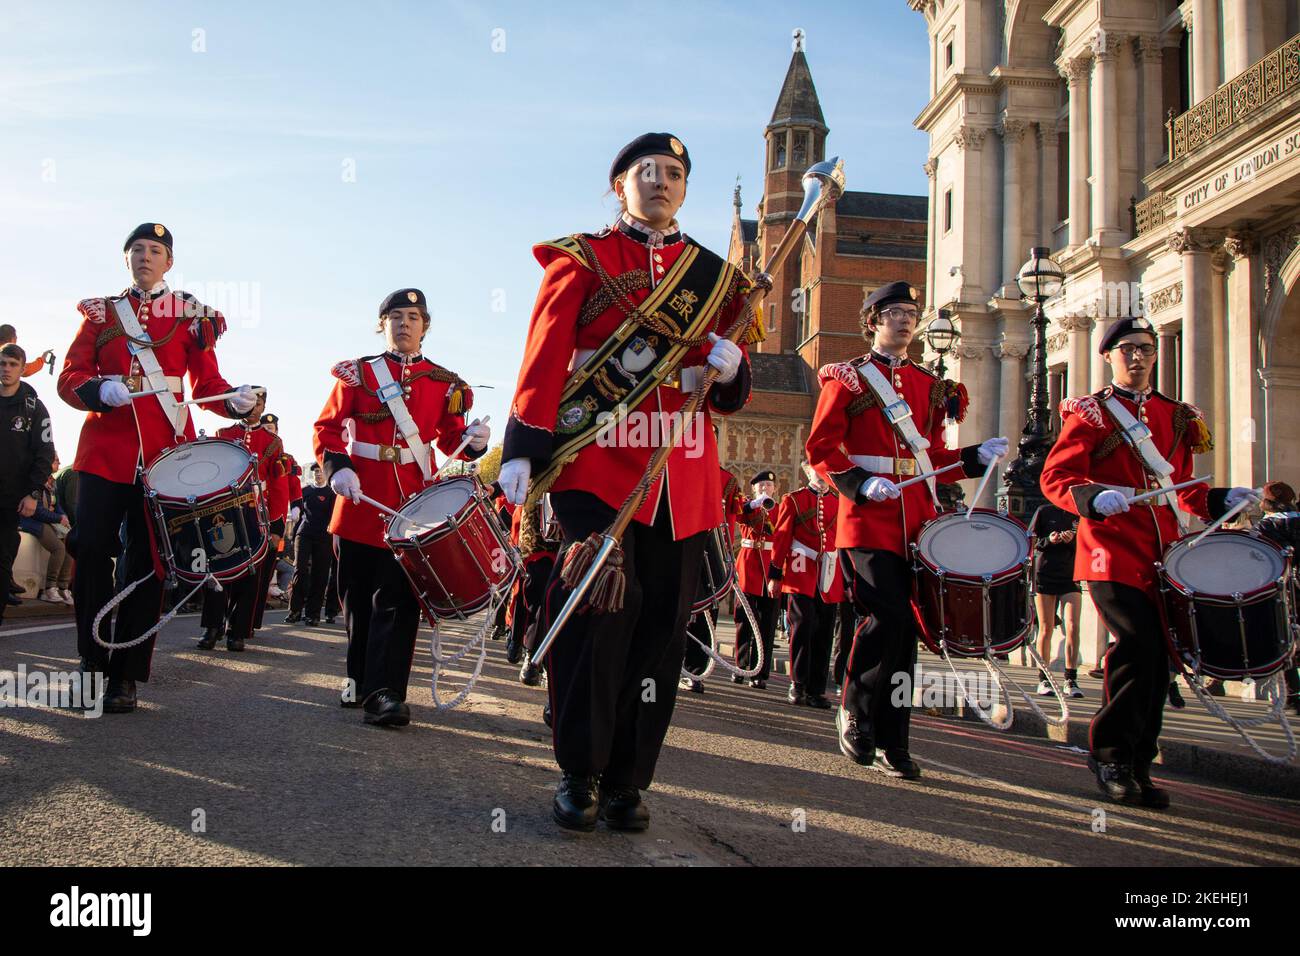 London, UK. 12th November 2022. Musicians from the St Dunstan's College Combined Cadet Force take part in the Lord Mayor’s Show in honor of the 694th Lord Mayor of the City of London, Alderman Nicholas Lyons. Credit: Kiki Streitberger/Alamy Live News Stock Photo